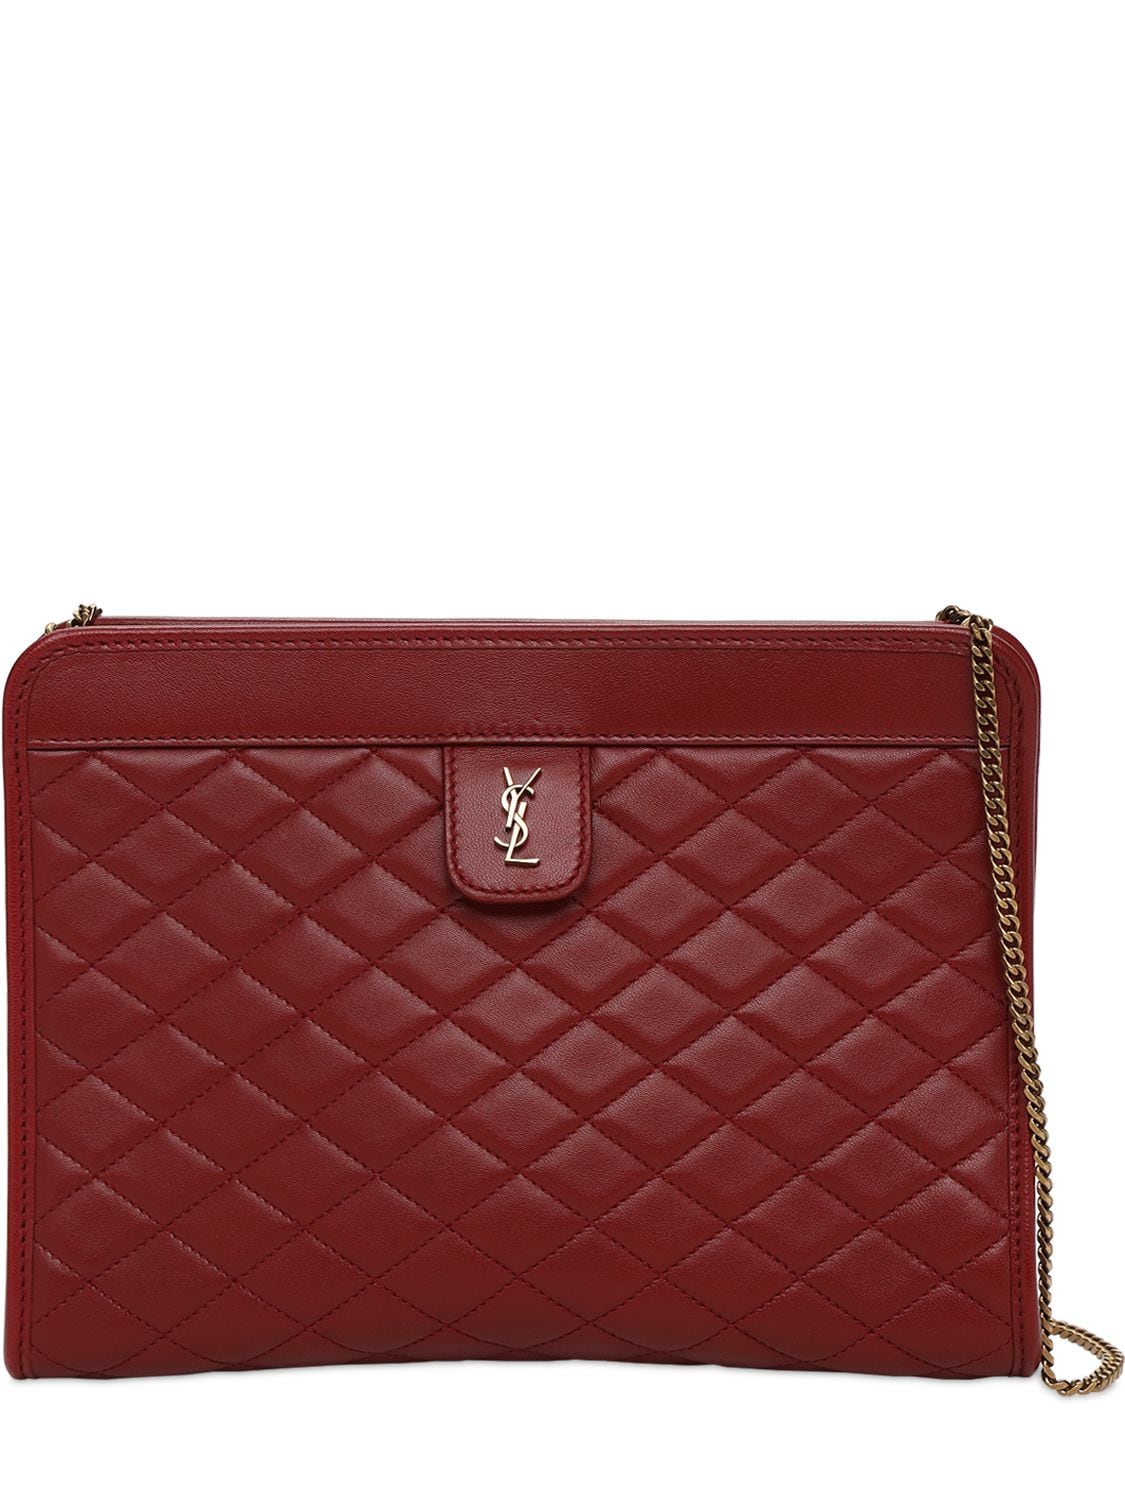 SAINT LAURENT VICTOIRE BABY QUILTED LEATHER CLUTCH,73IYDD014-NJAWOA2